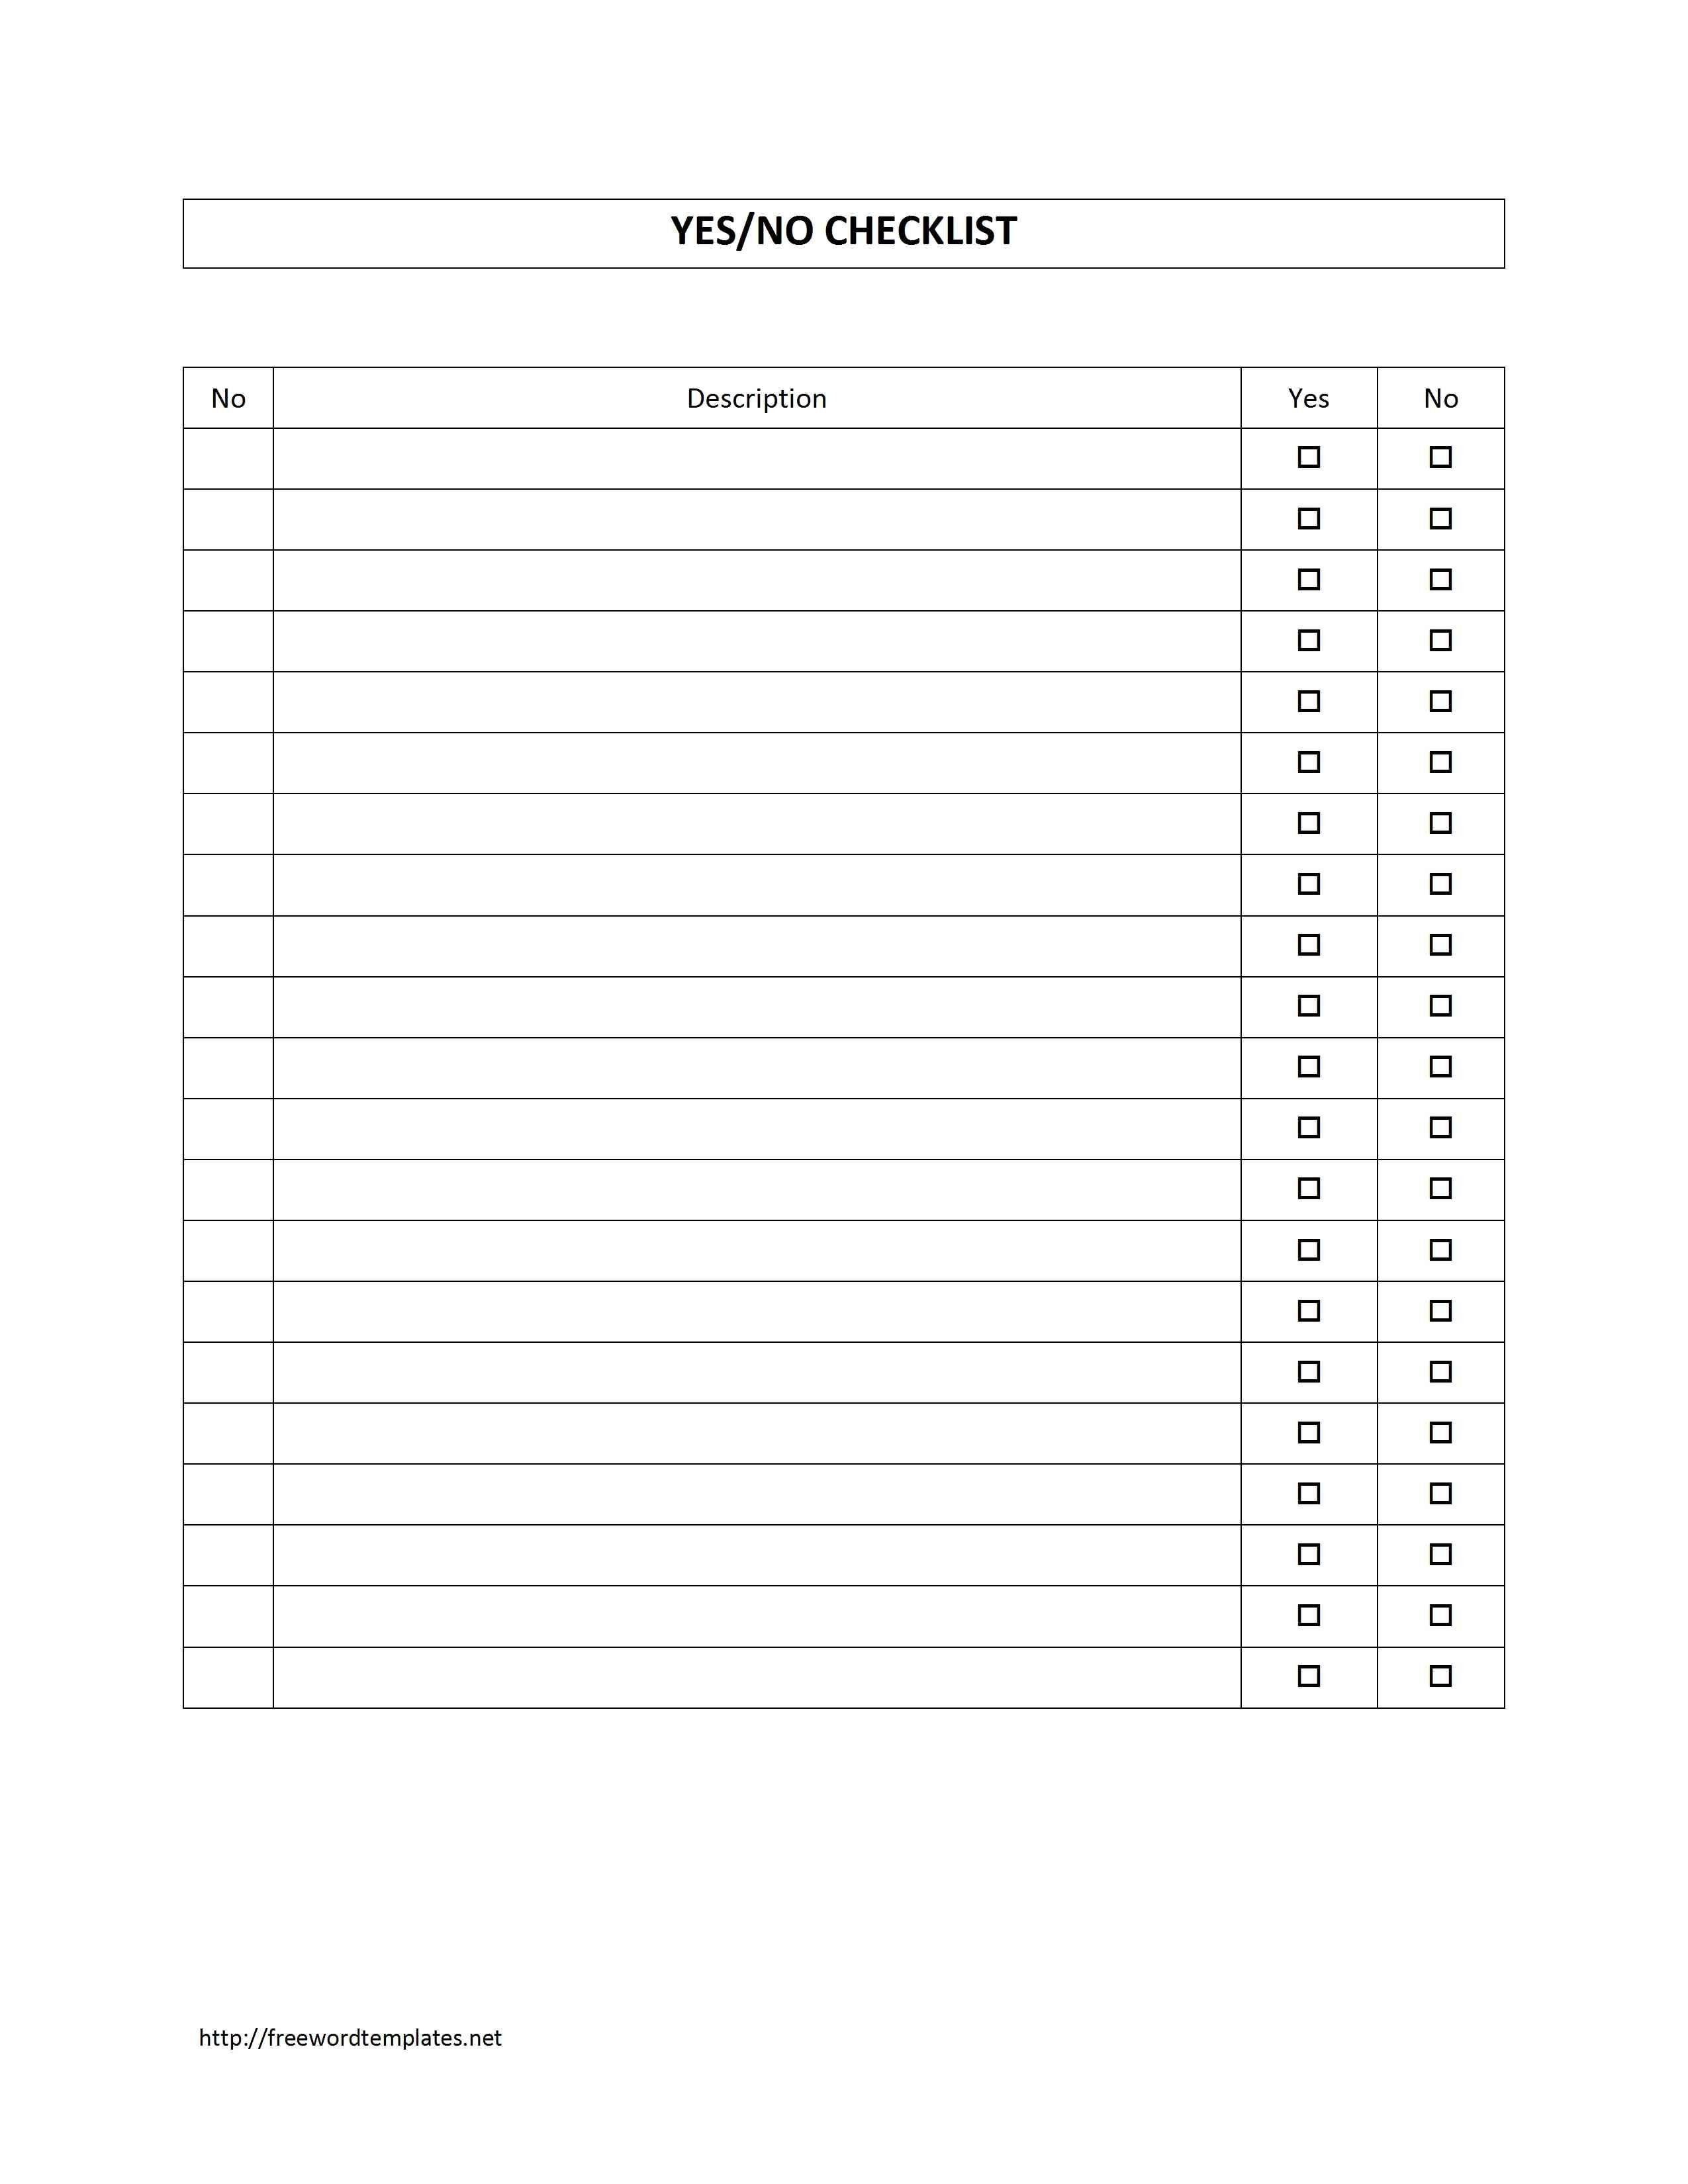 Survey Sheet with Yes No Checklist Template